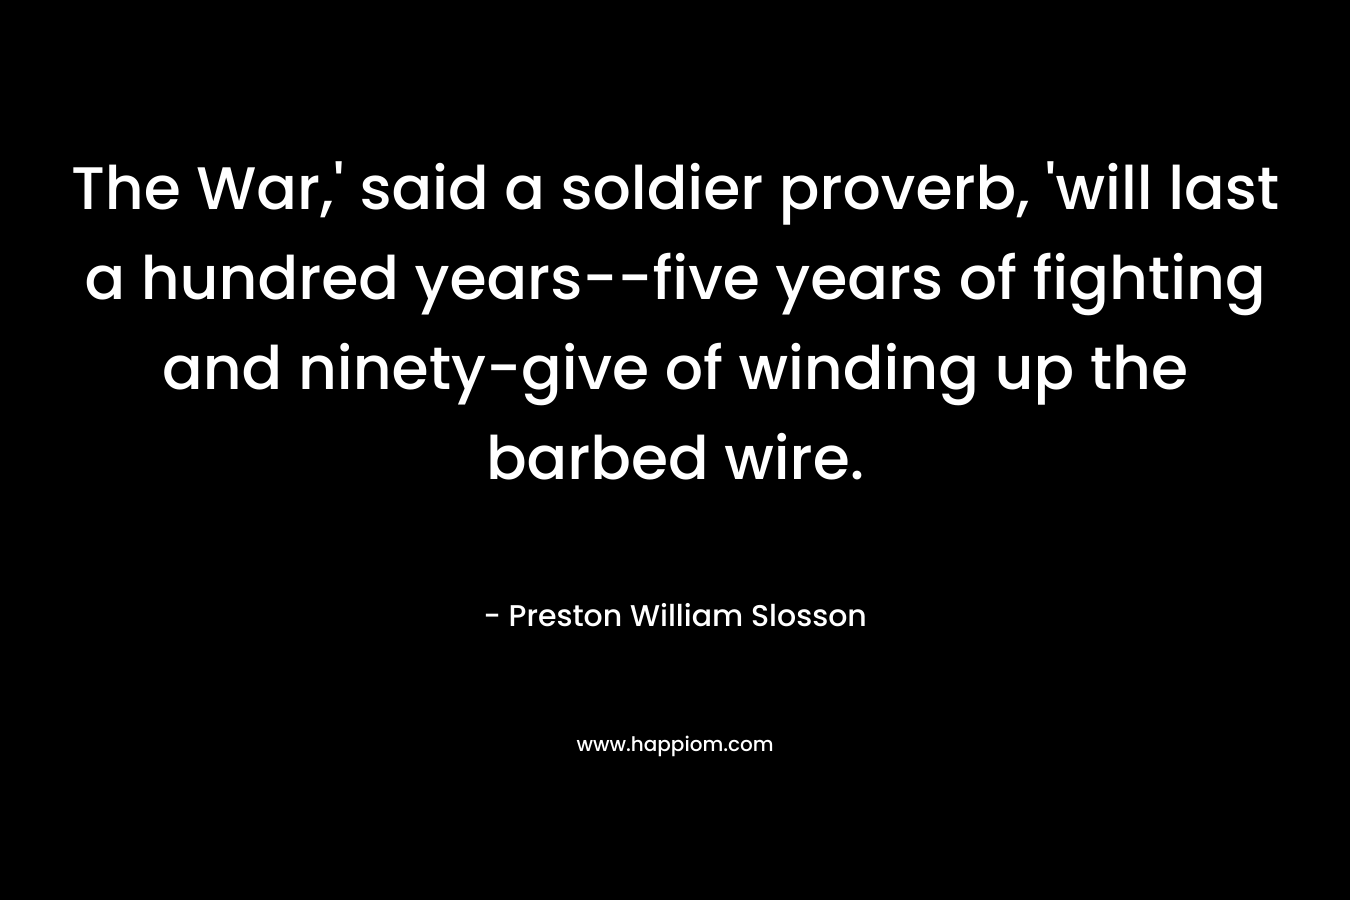 The War,' said a soldier proverb, 'will last a hundred years--five years of fighting and ninety-give of winding up the barbed wire.